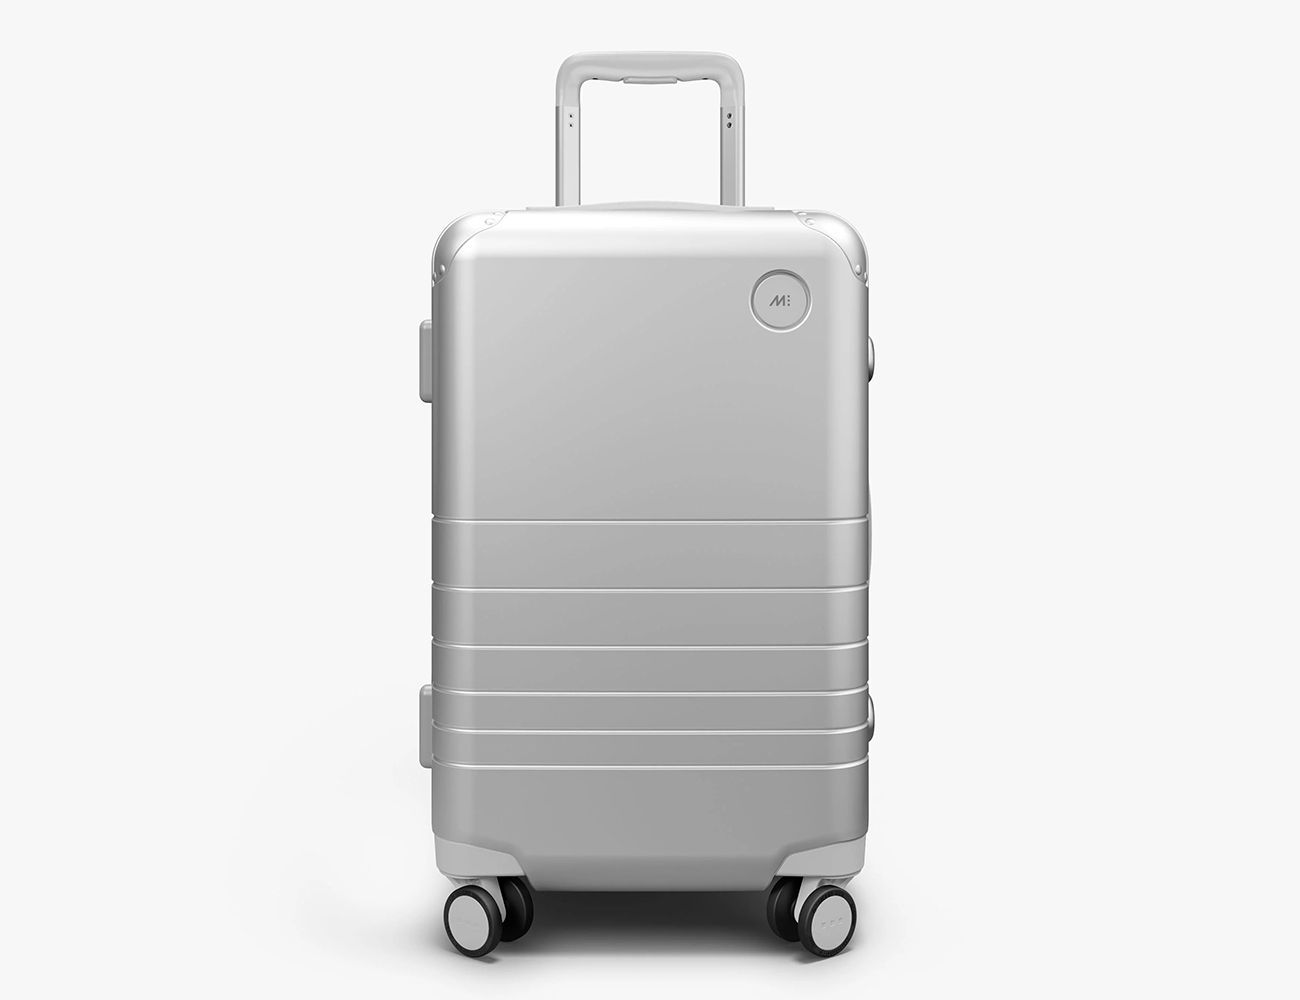 stay up surfing copy best aluminum luggage Garbage can order So many